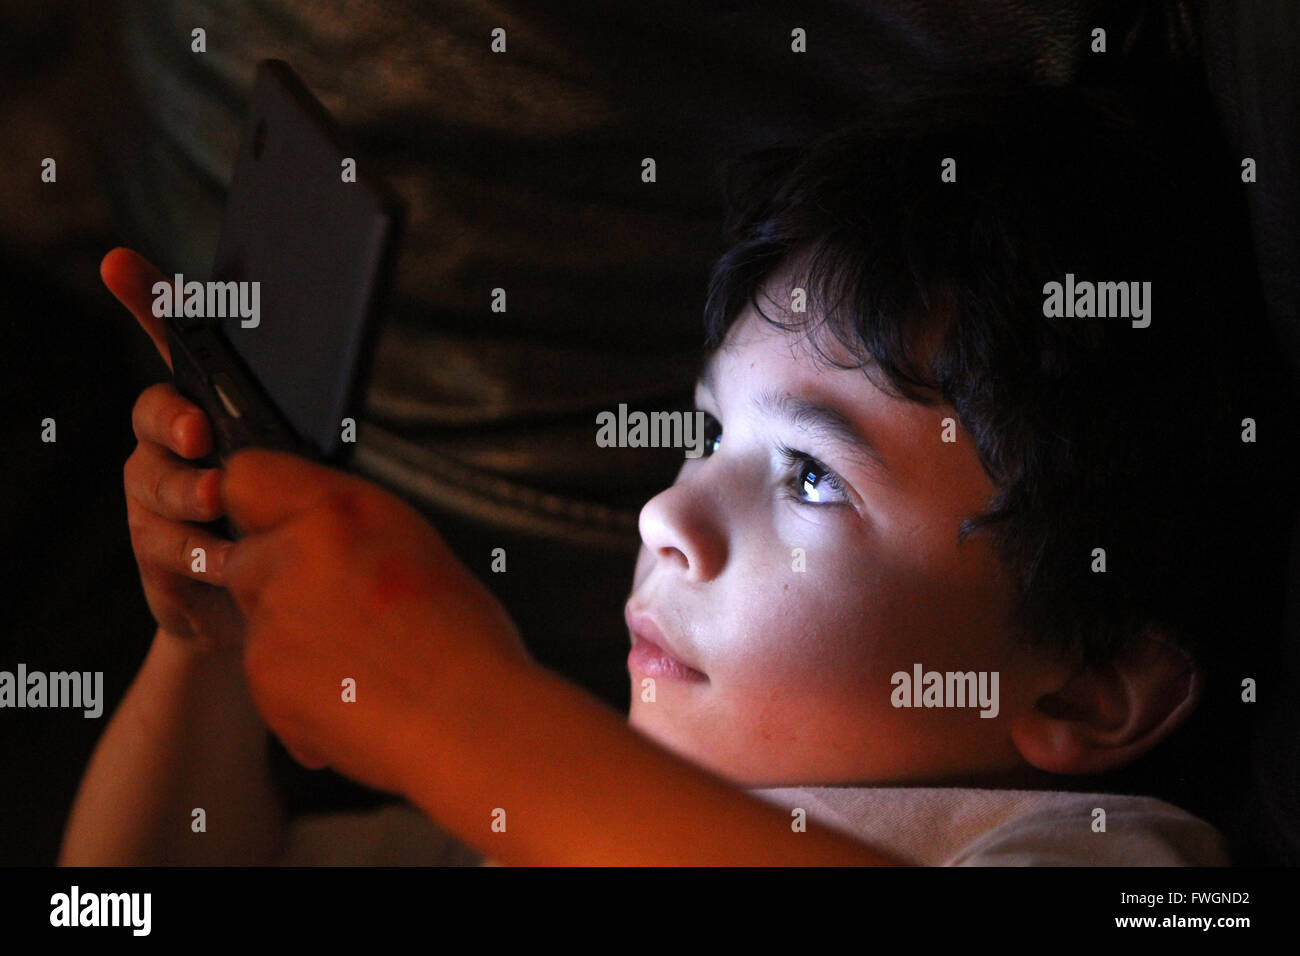 Young boy playing computer console Stock Photo